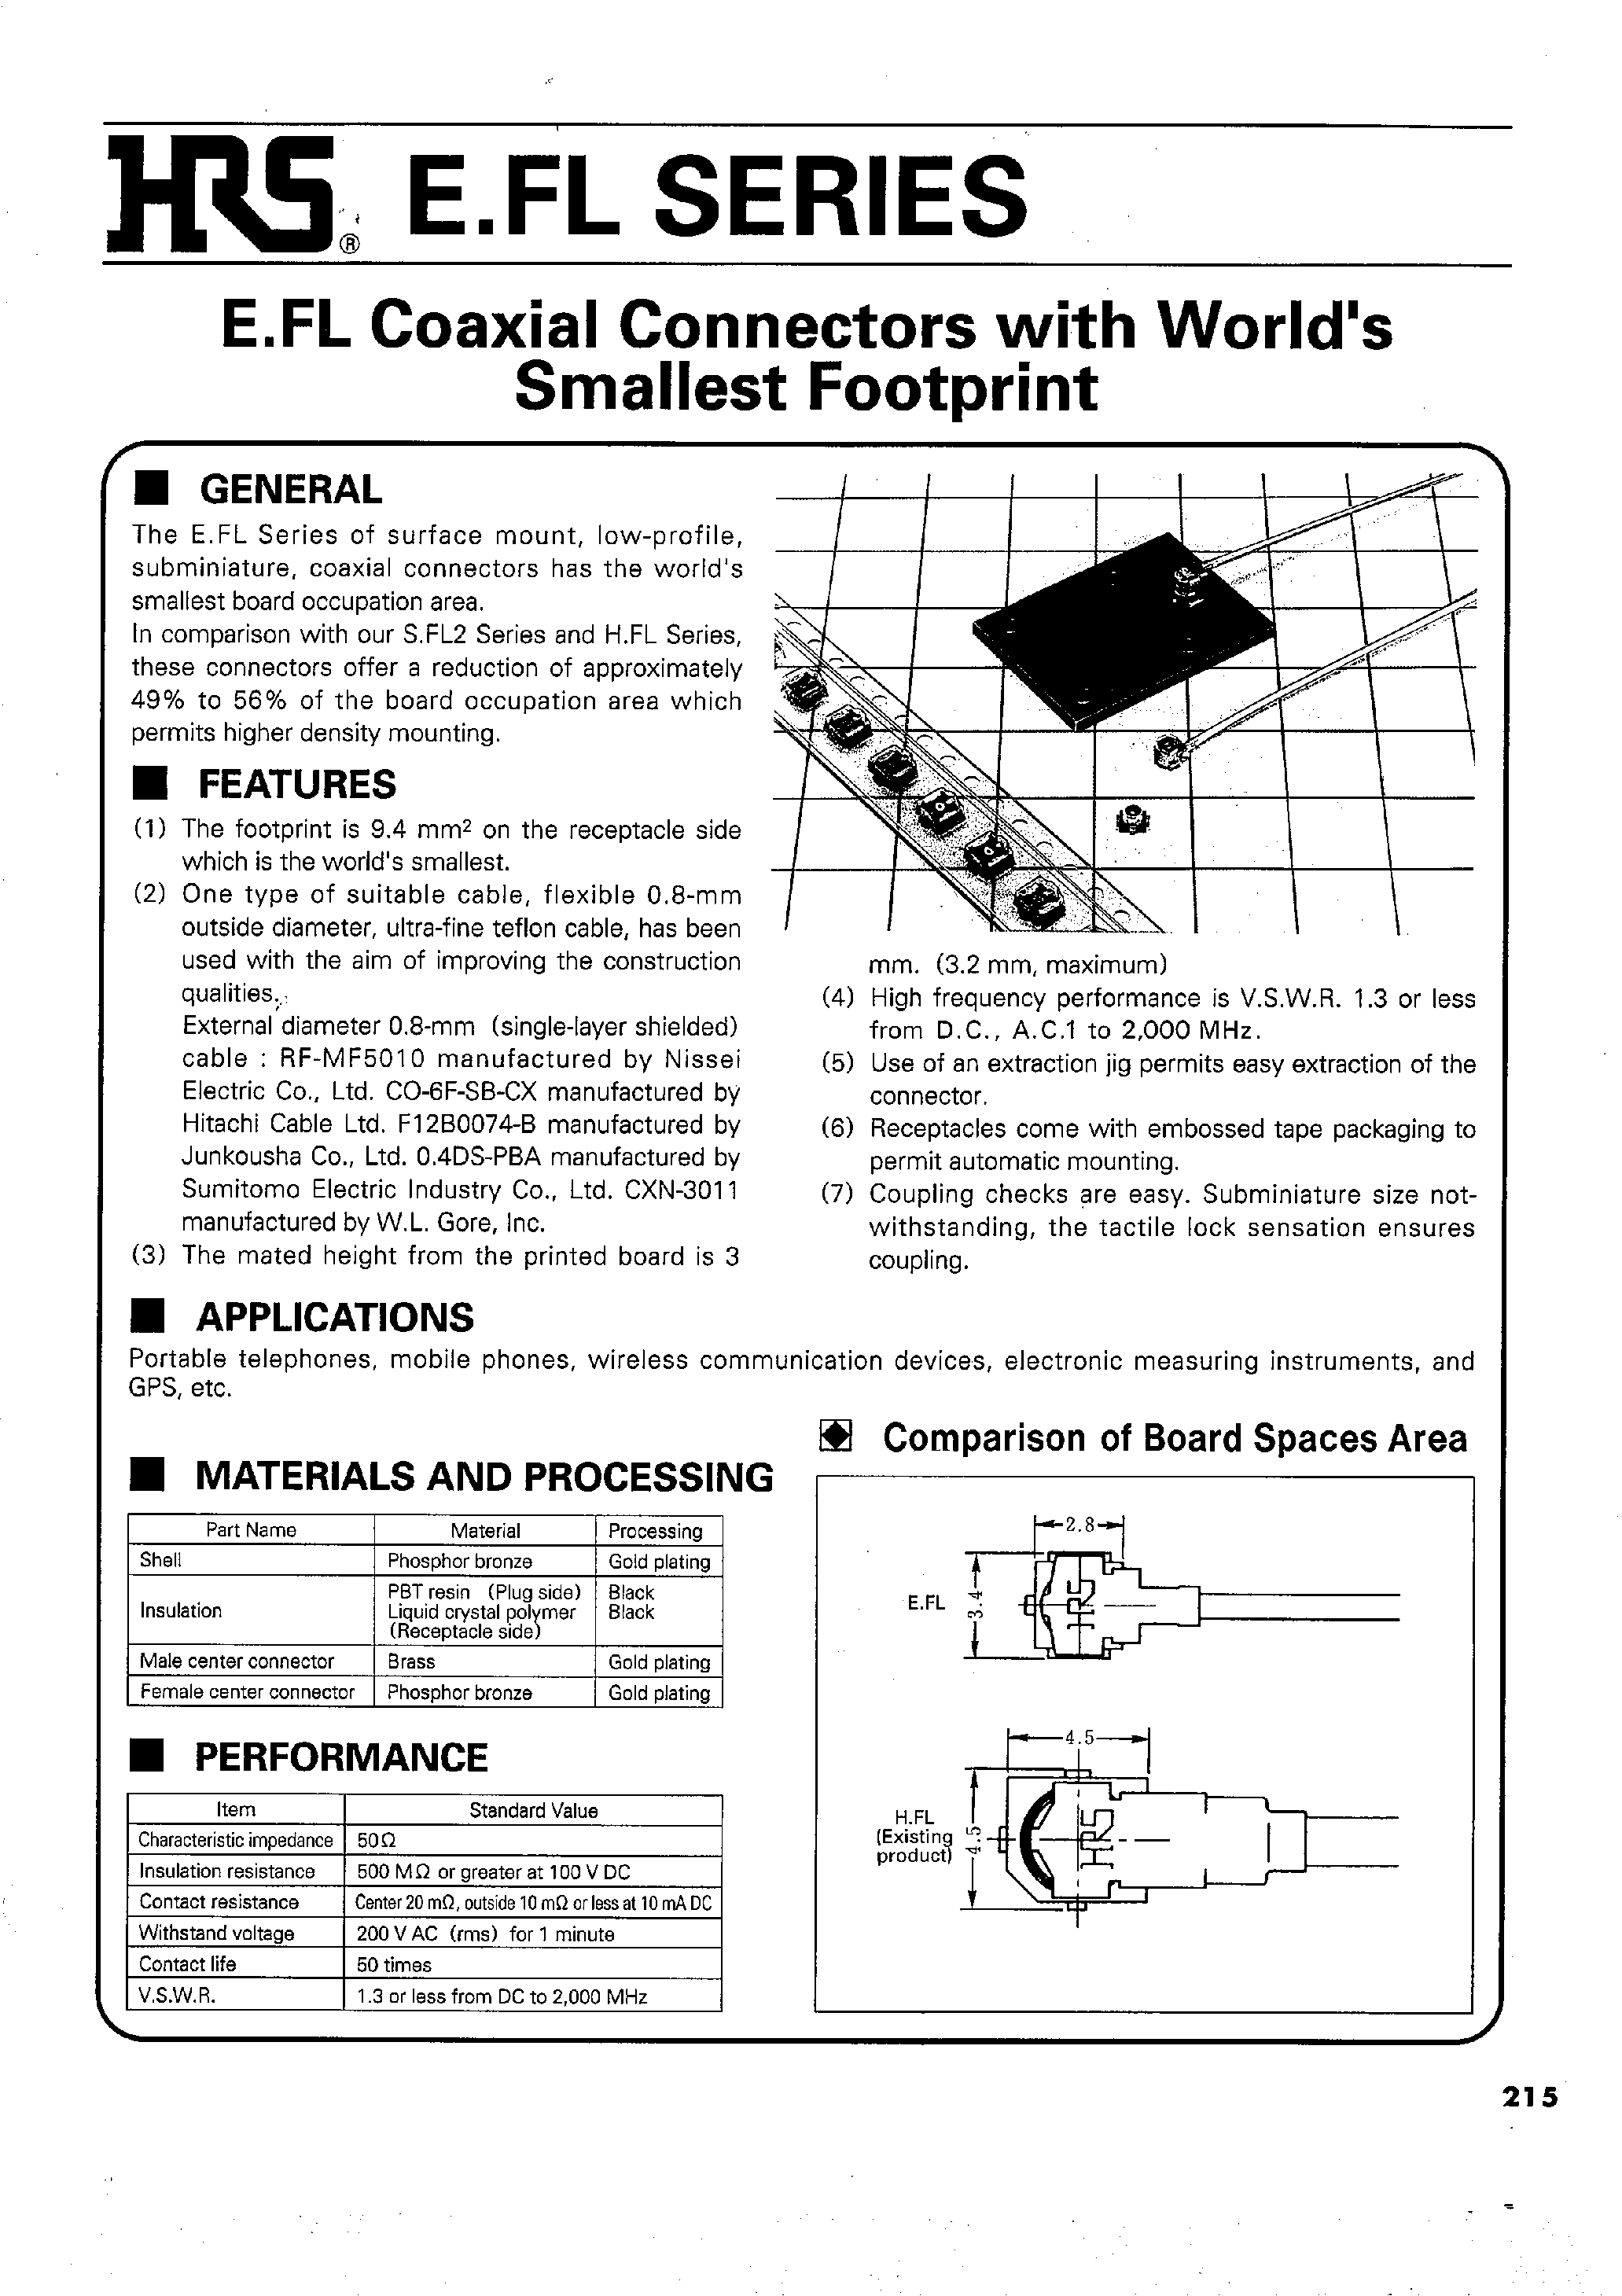 Datasheet E.FL-LP-040 - E.FL Coaxial Connectors with World Smallest Footprint page 1